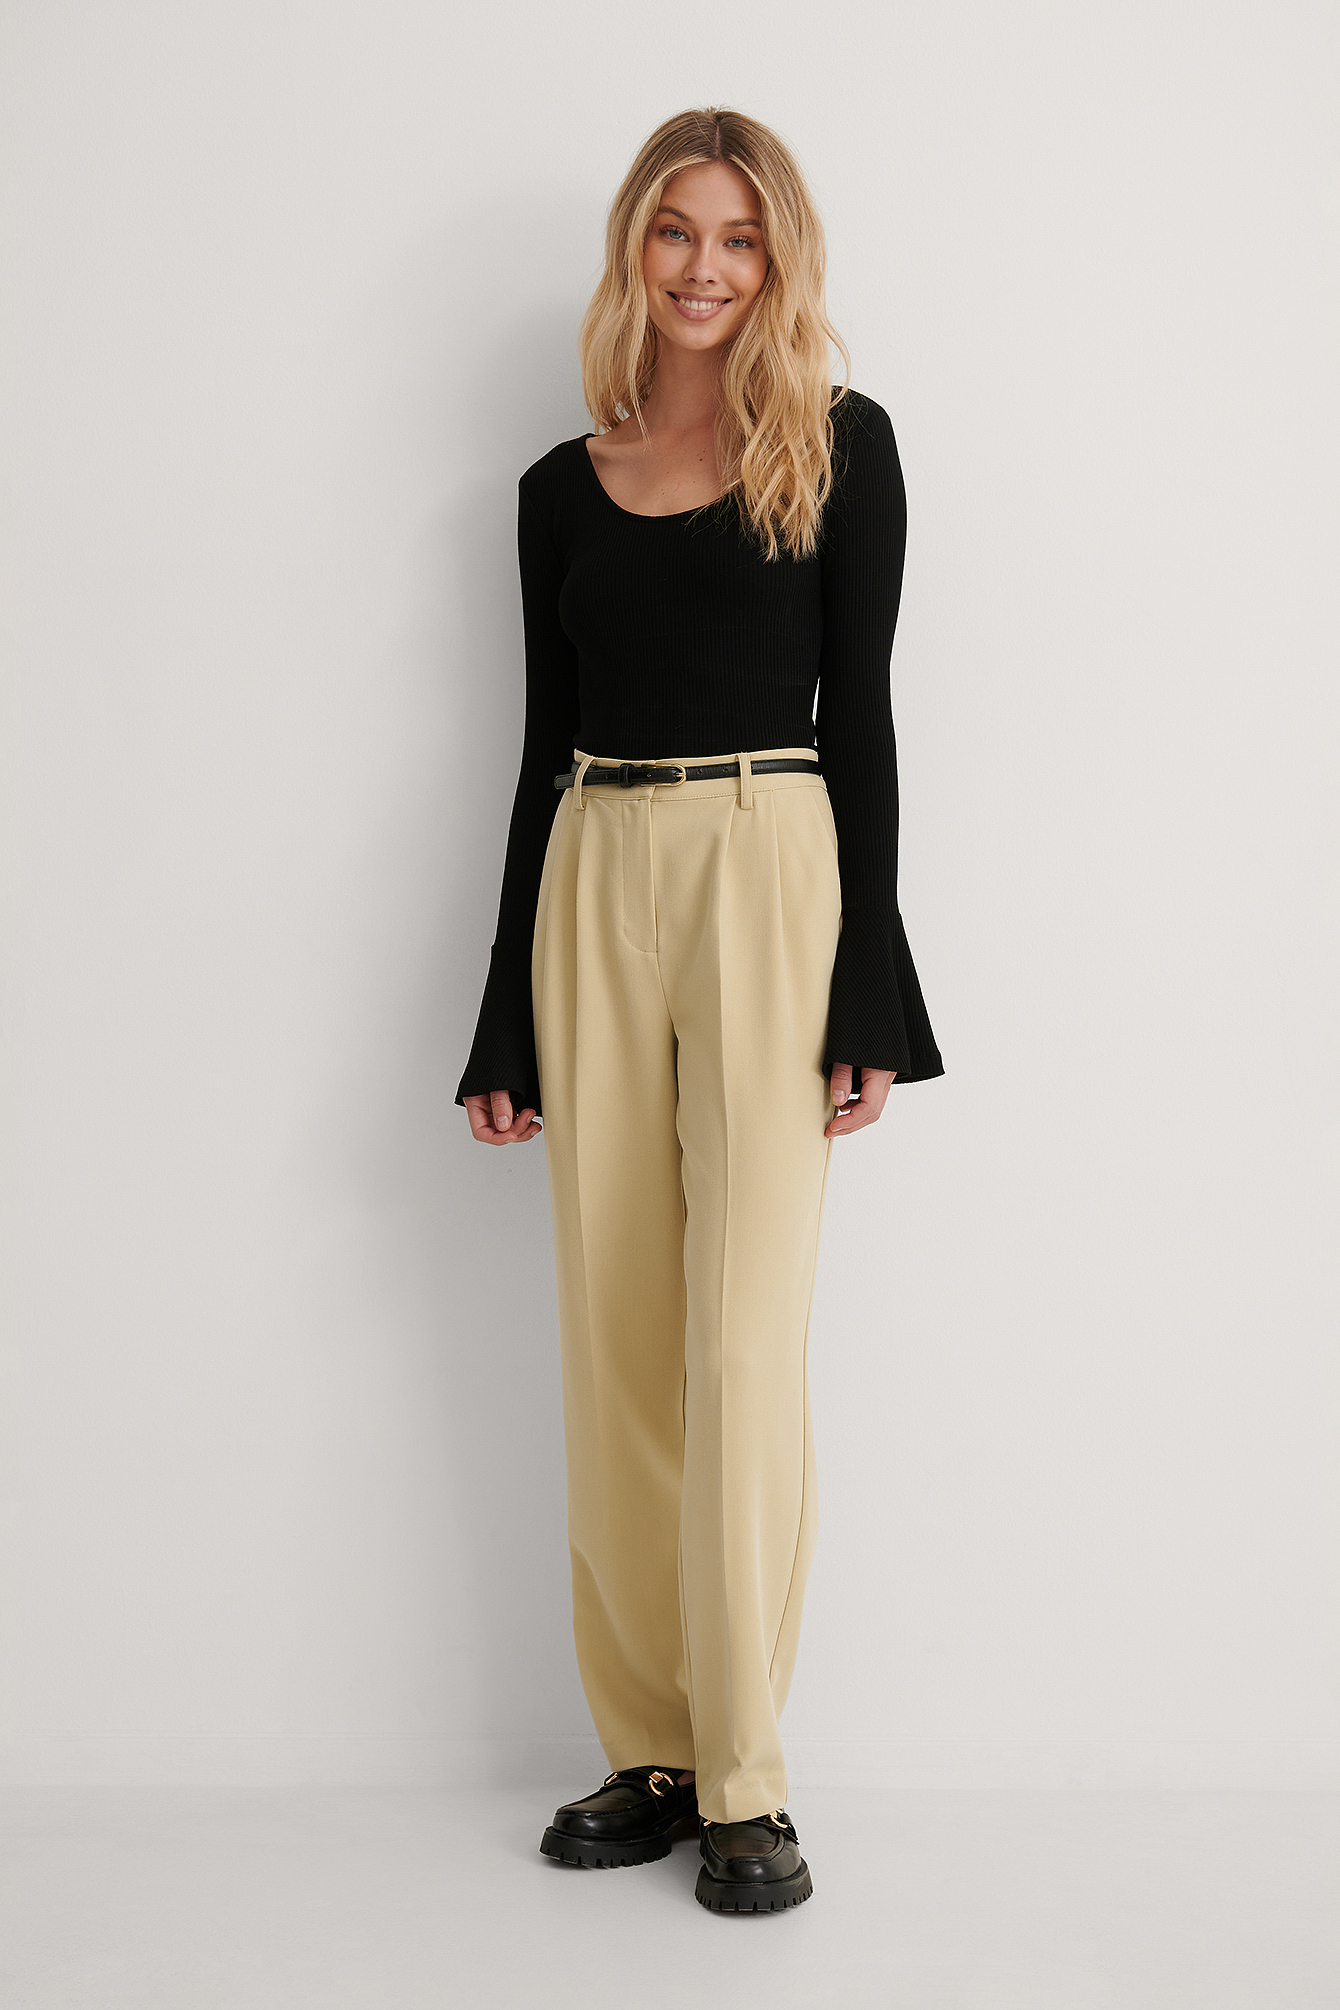 Trumpet Sleeve Rib Top Outfit